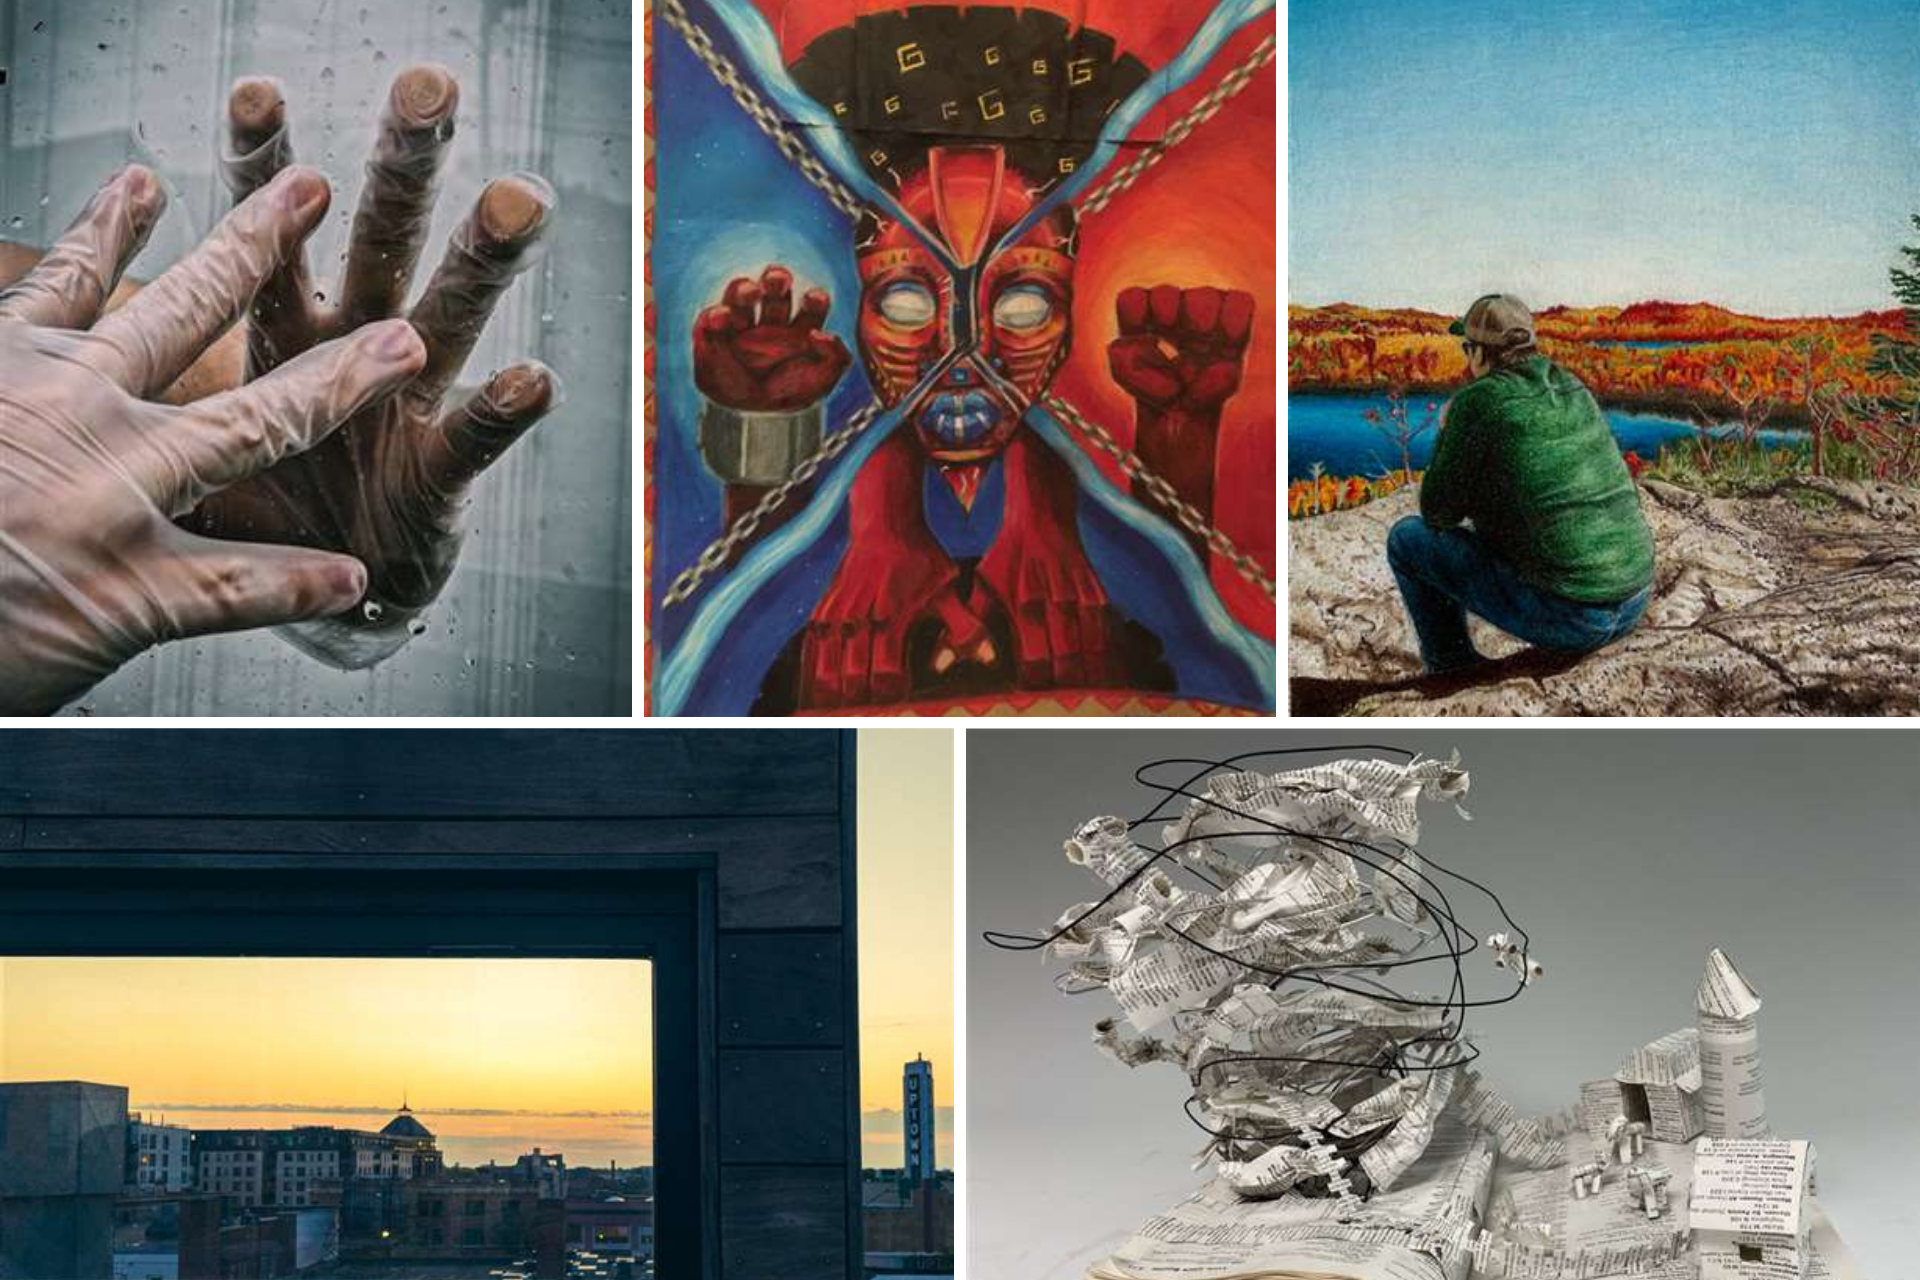 A Hand wearing a latex glove, a painting, a person sitting on a rock, a sunset, and a newspaper sculpture